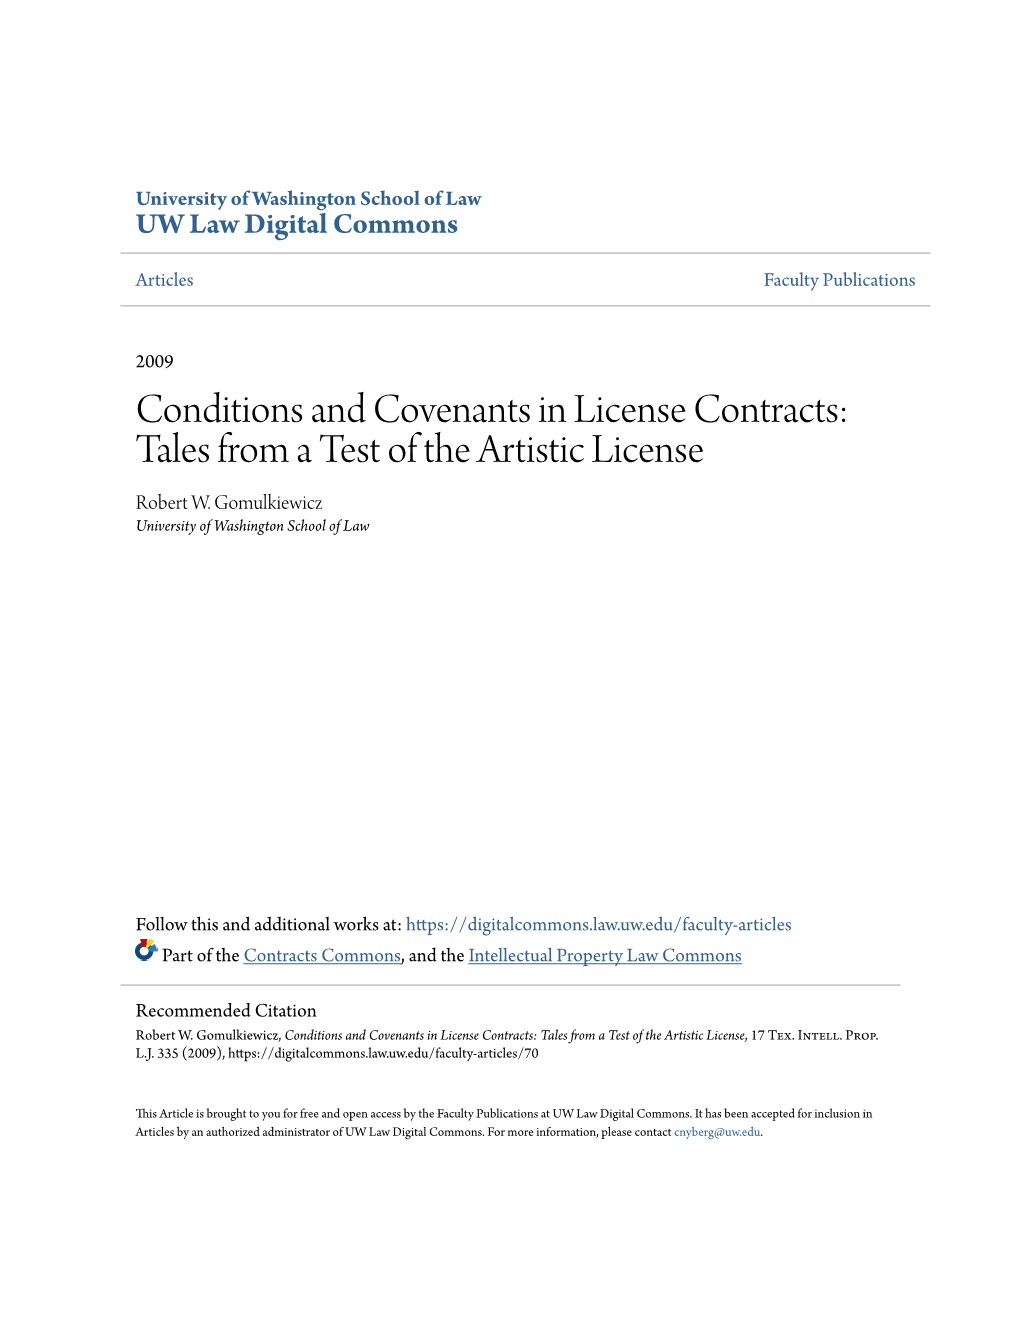 Conditions and Covenants in License Contracts: Tales from a Test of the Artistic License Robert W